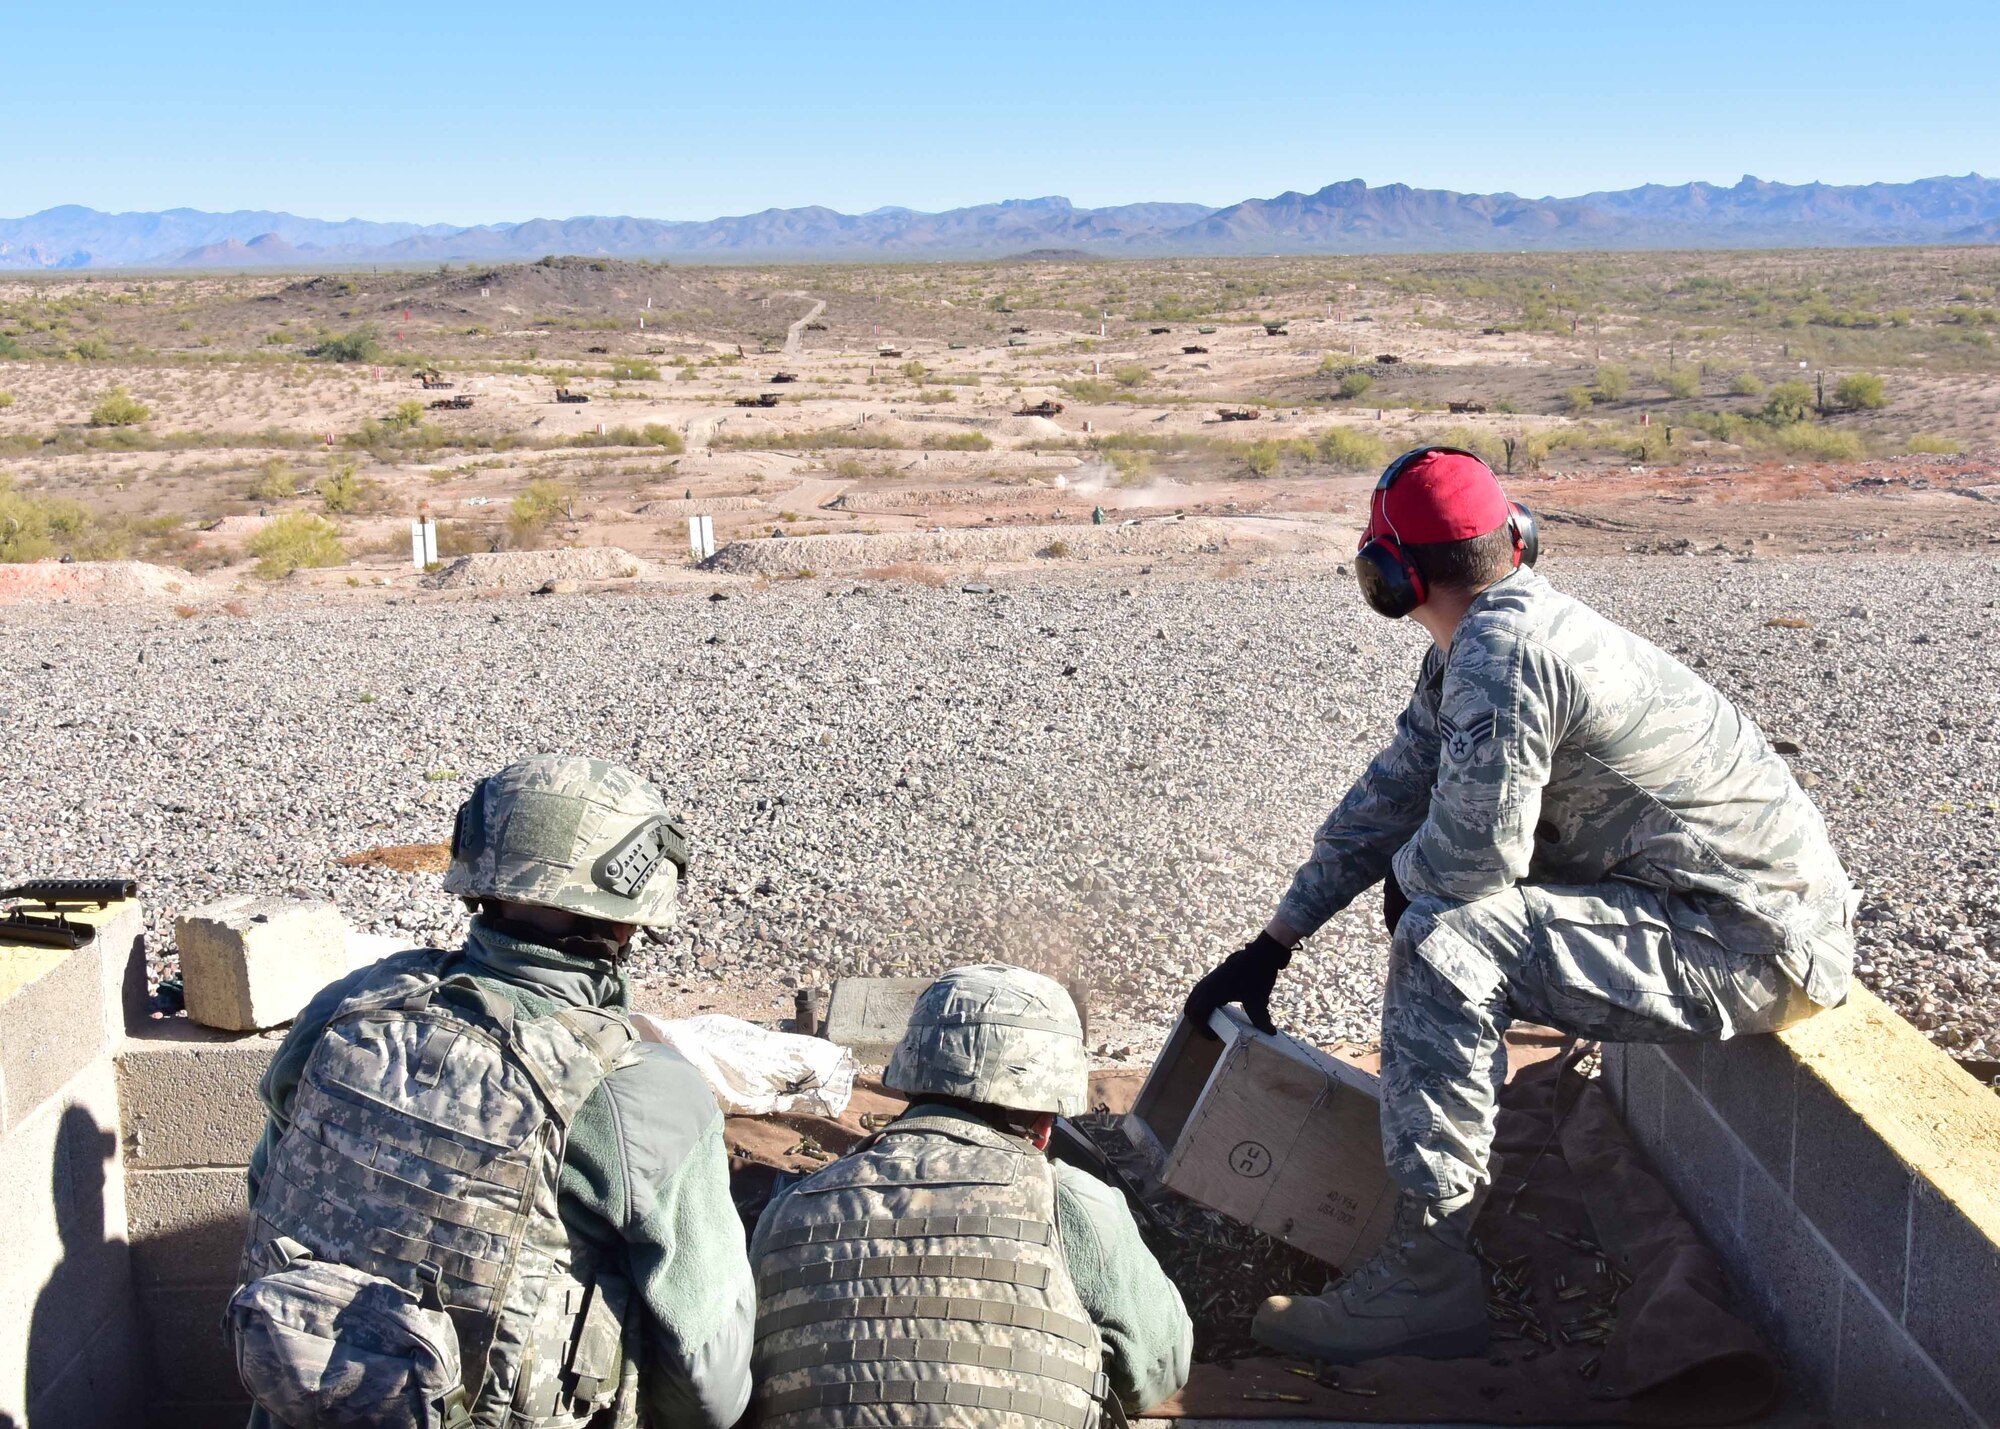 Airmen from the 944th Security Forces Squadron conduct their annual heavy weapons qualification training Dec. 3 at the Army National Guard range in Florence, Ariz. The fire team member’s qualified on the M240B, M249, and M203 grenade launcher. (U.S. Air Force photo taken by Tech. Sgt. Louis Vega Jr.)